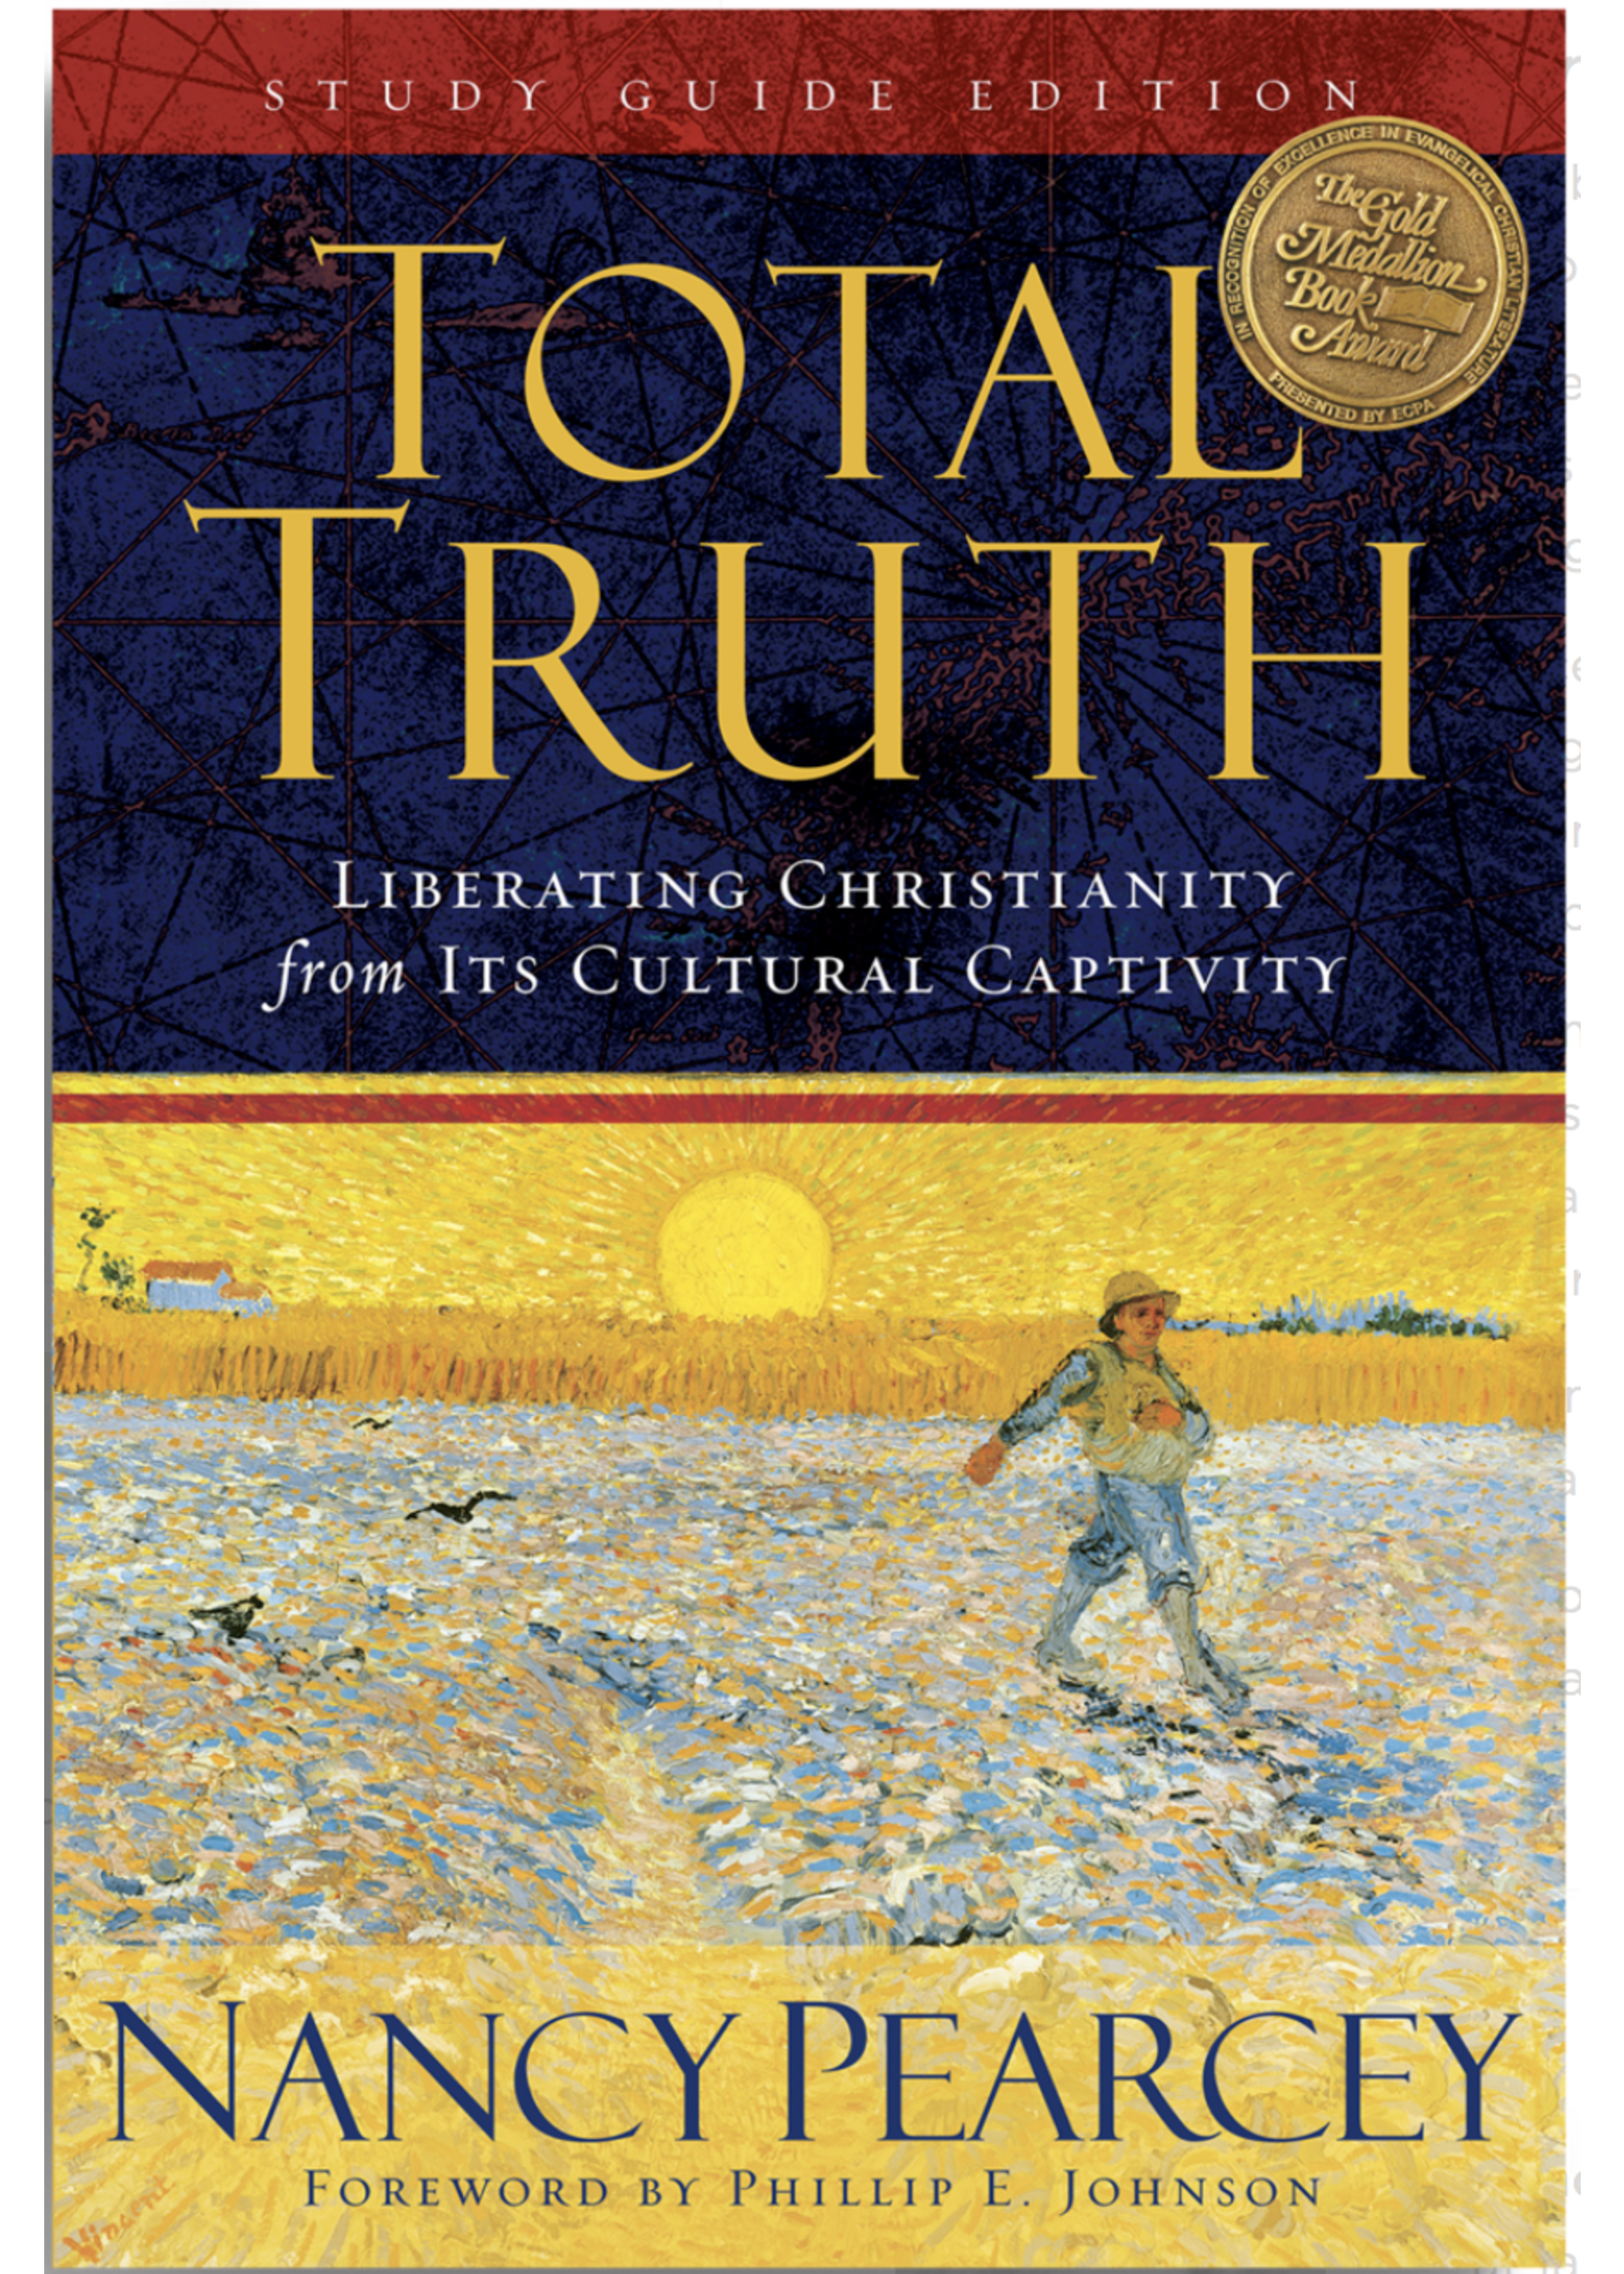 Pearcey, Nancy R. Total Truth: Liberating Christianity from Its Cultural Captivity Study Guide Edition